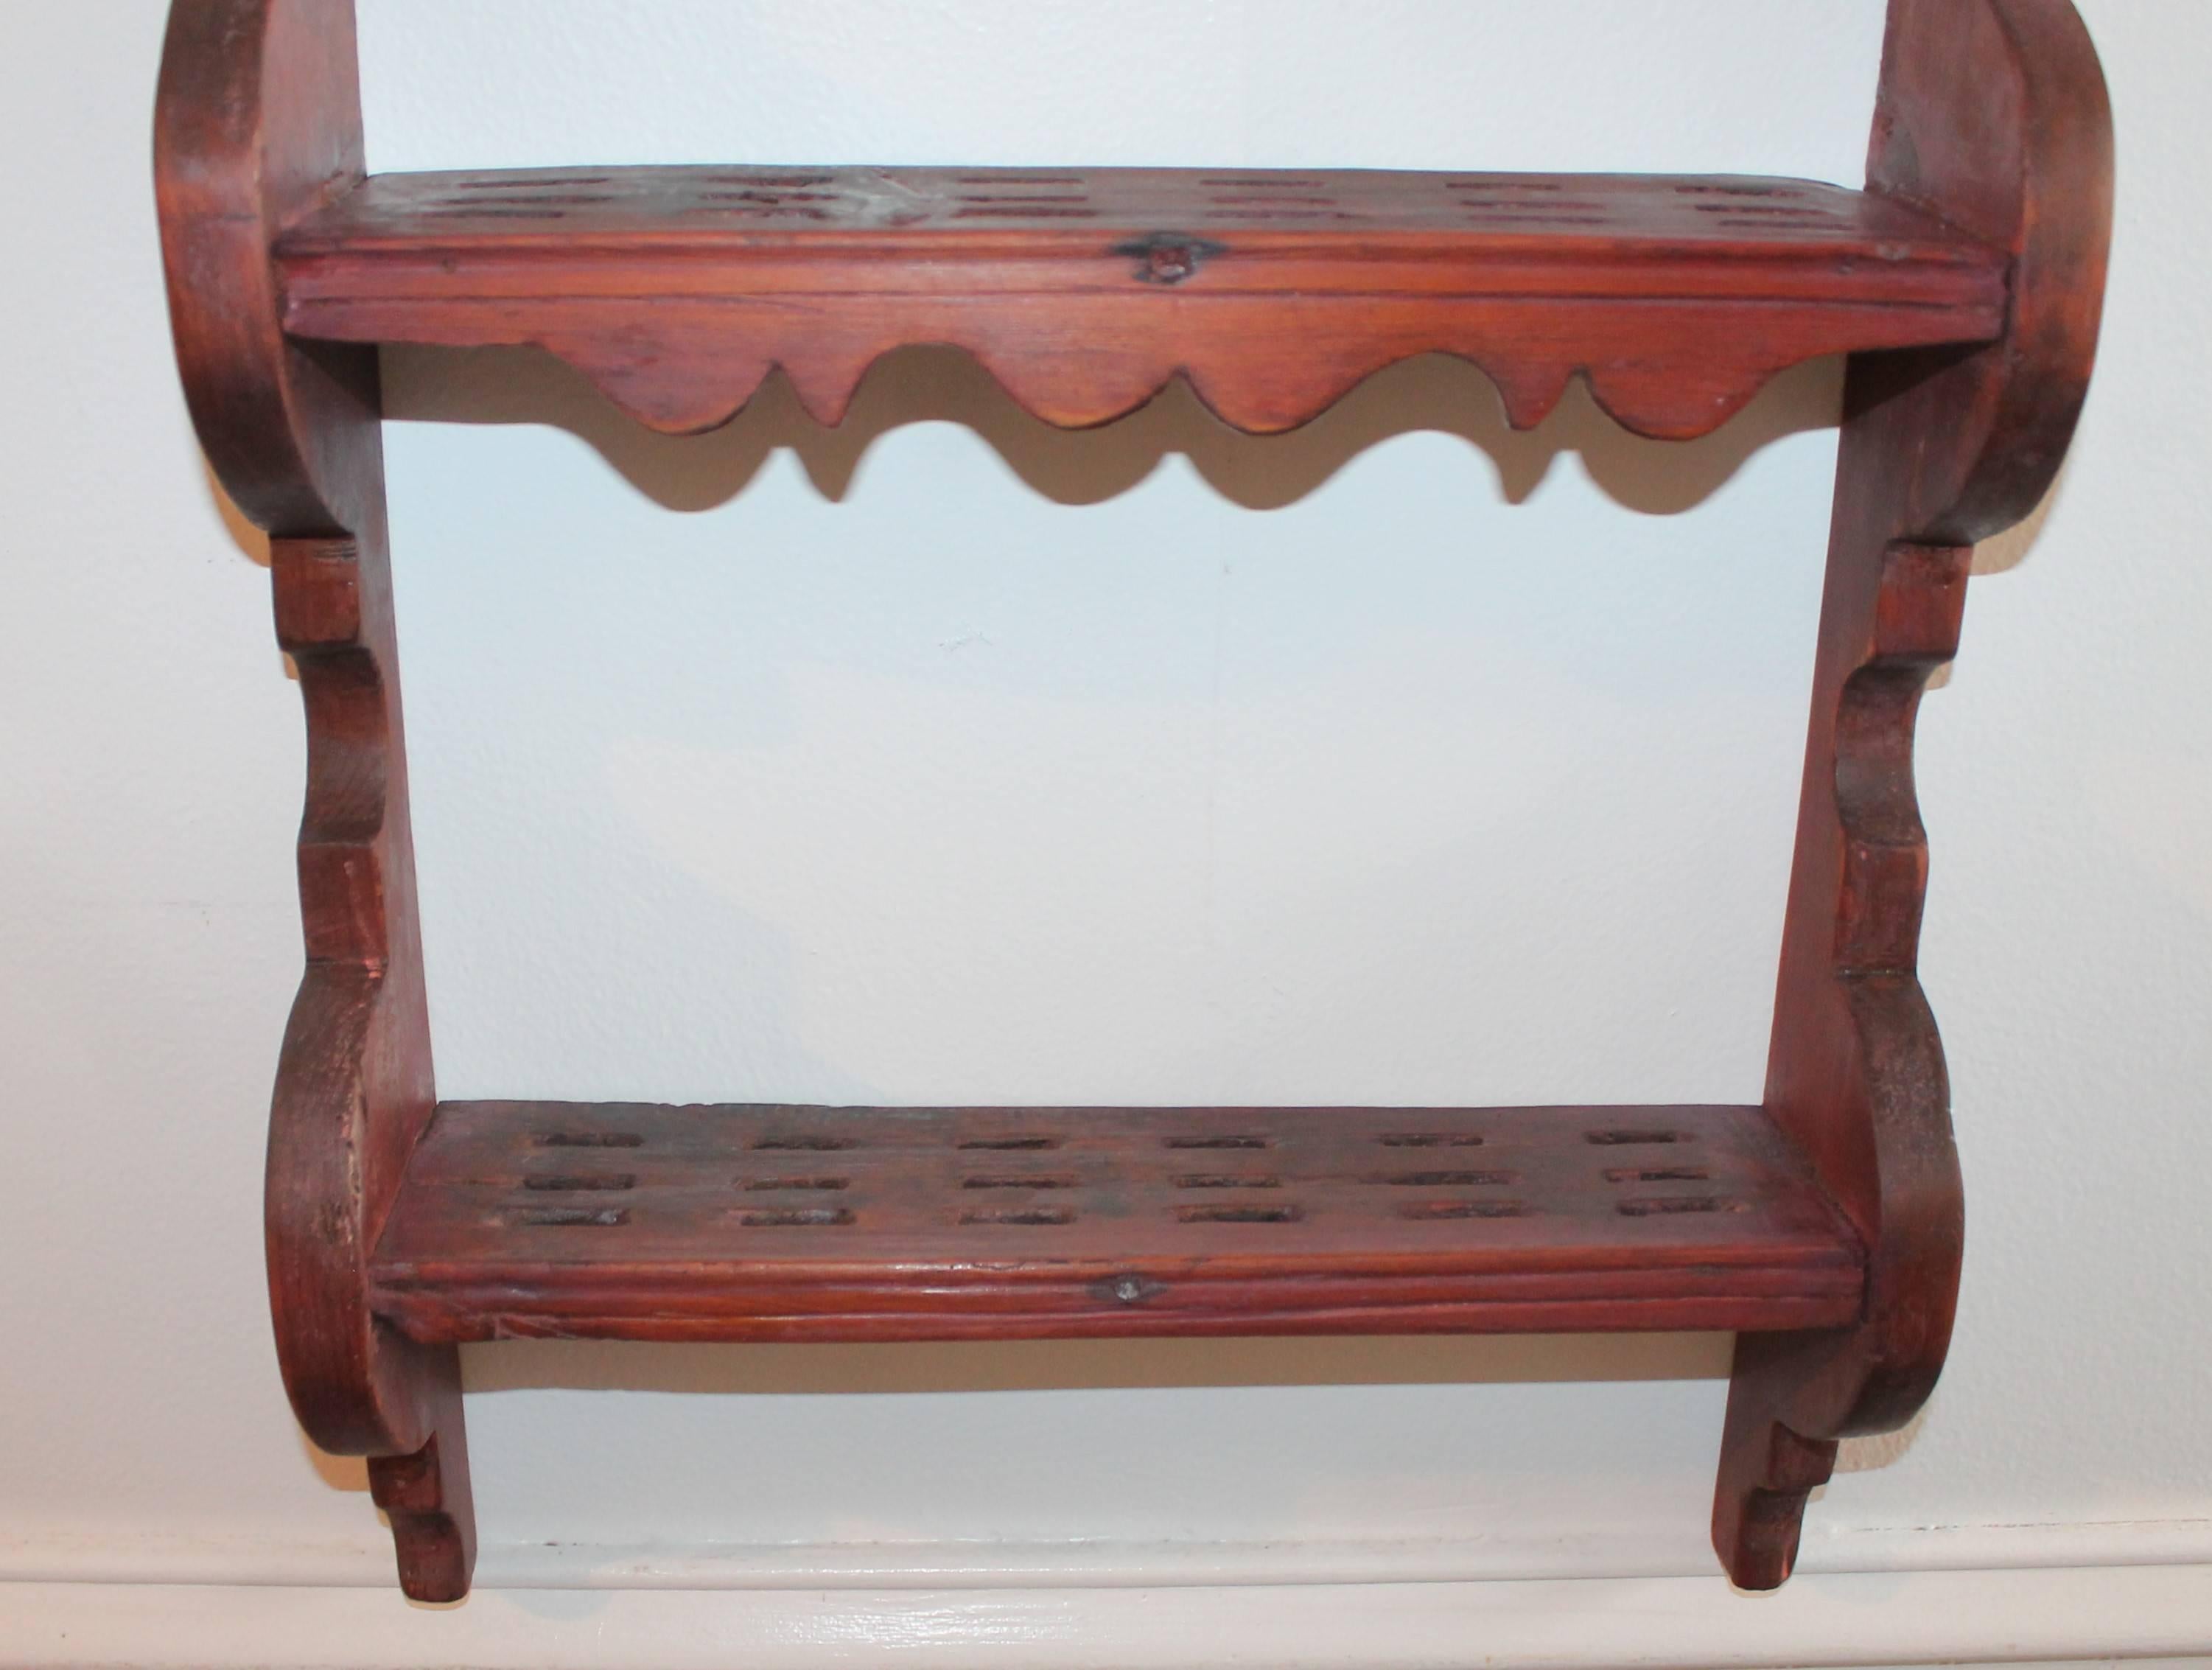 Hand-Painted Early 18th Century Original Red Painted Spoon Rack